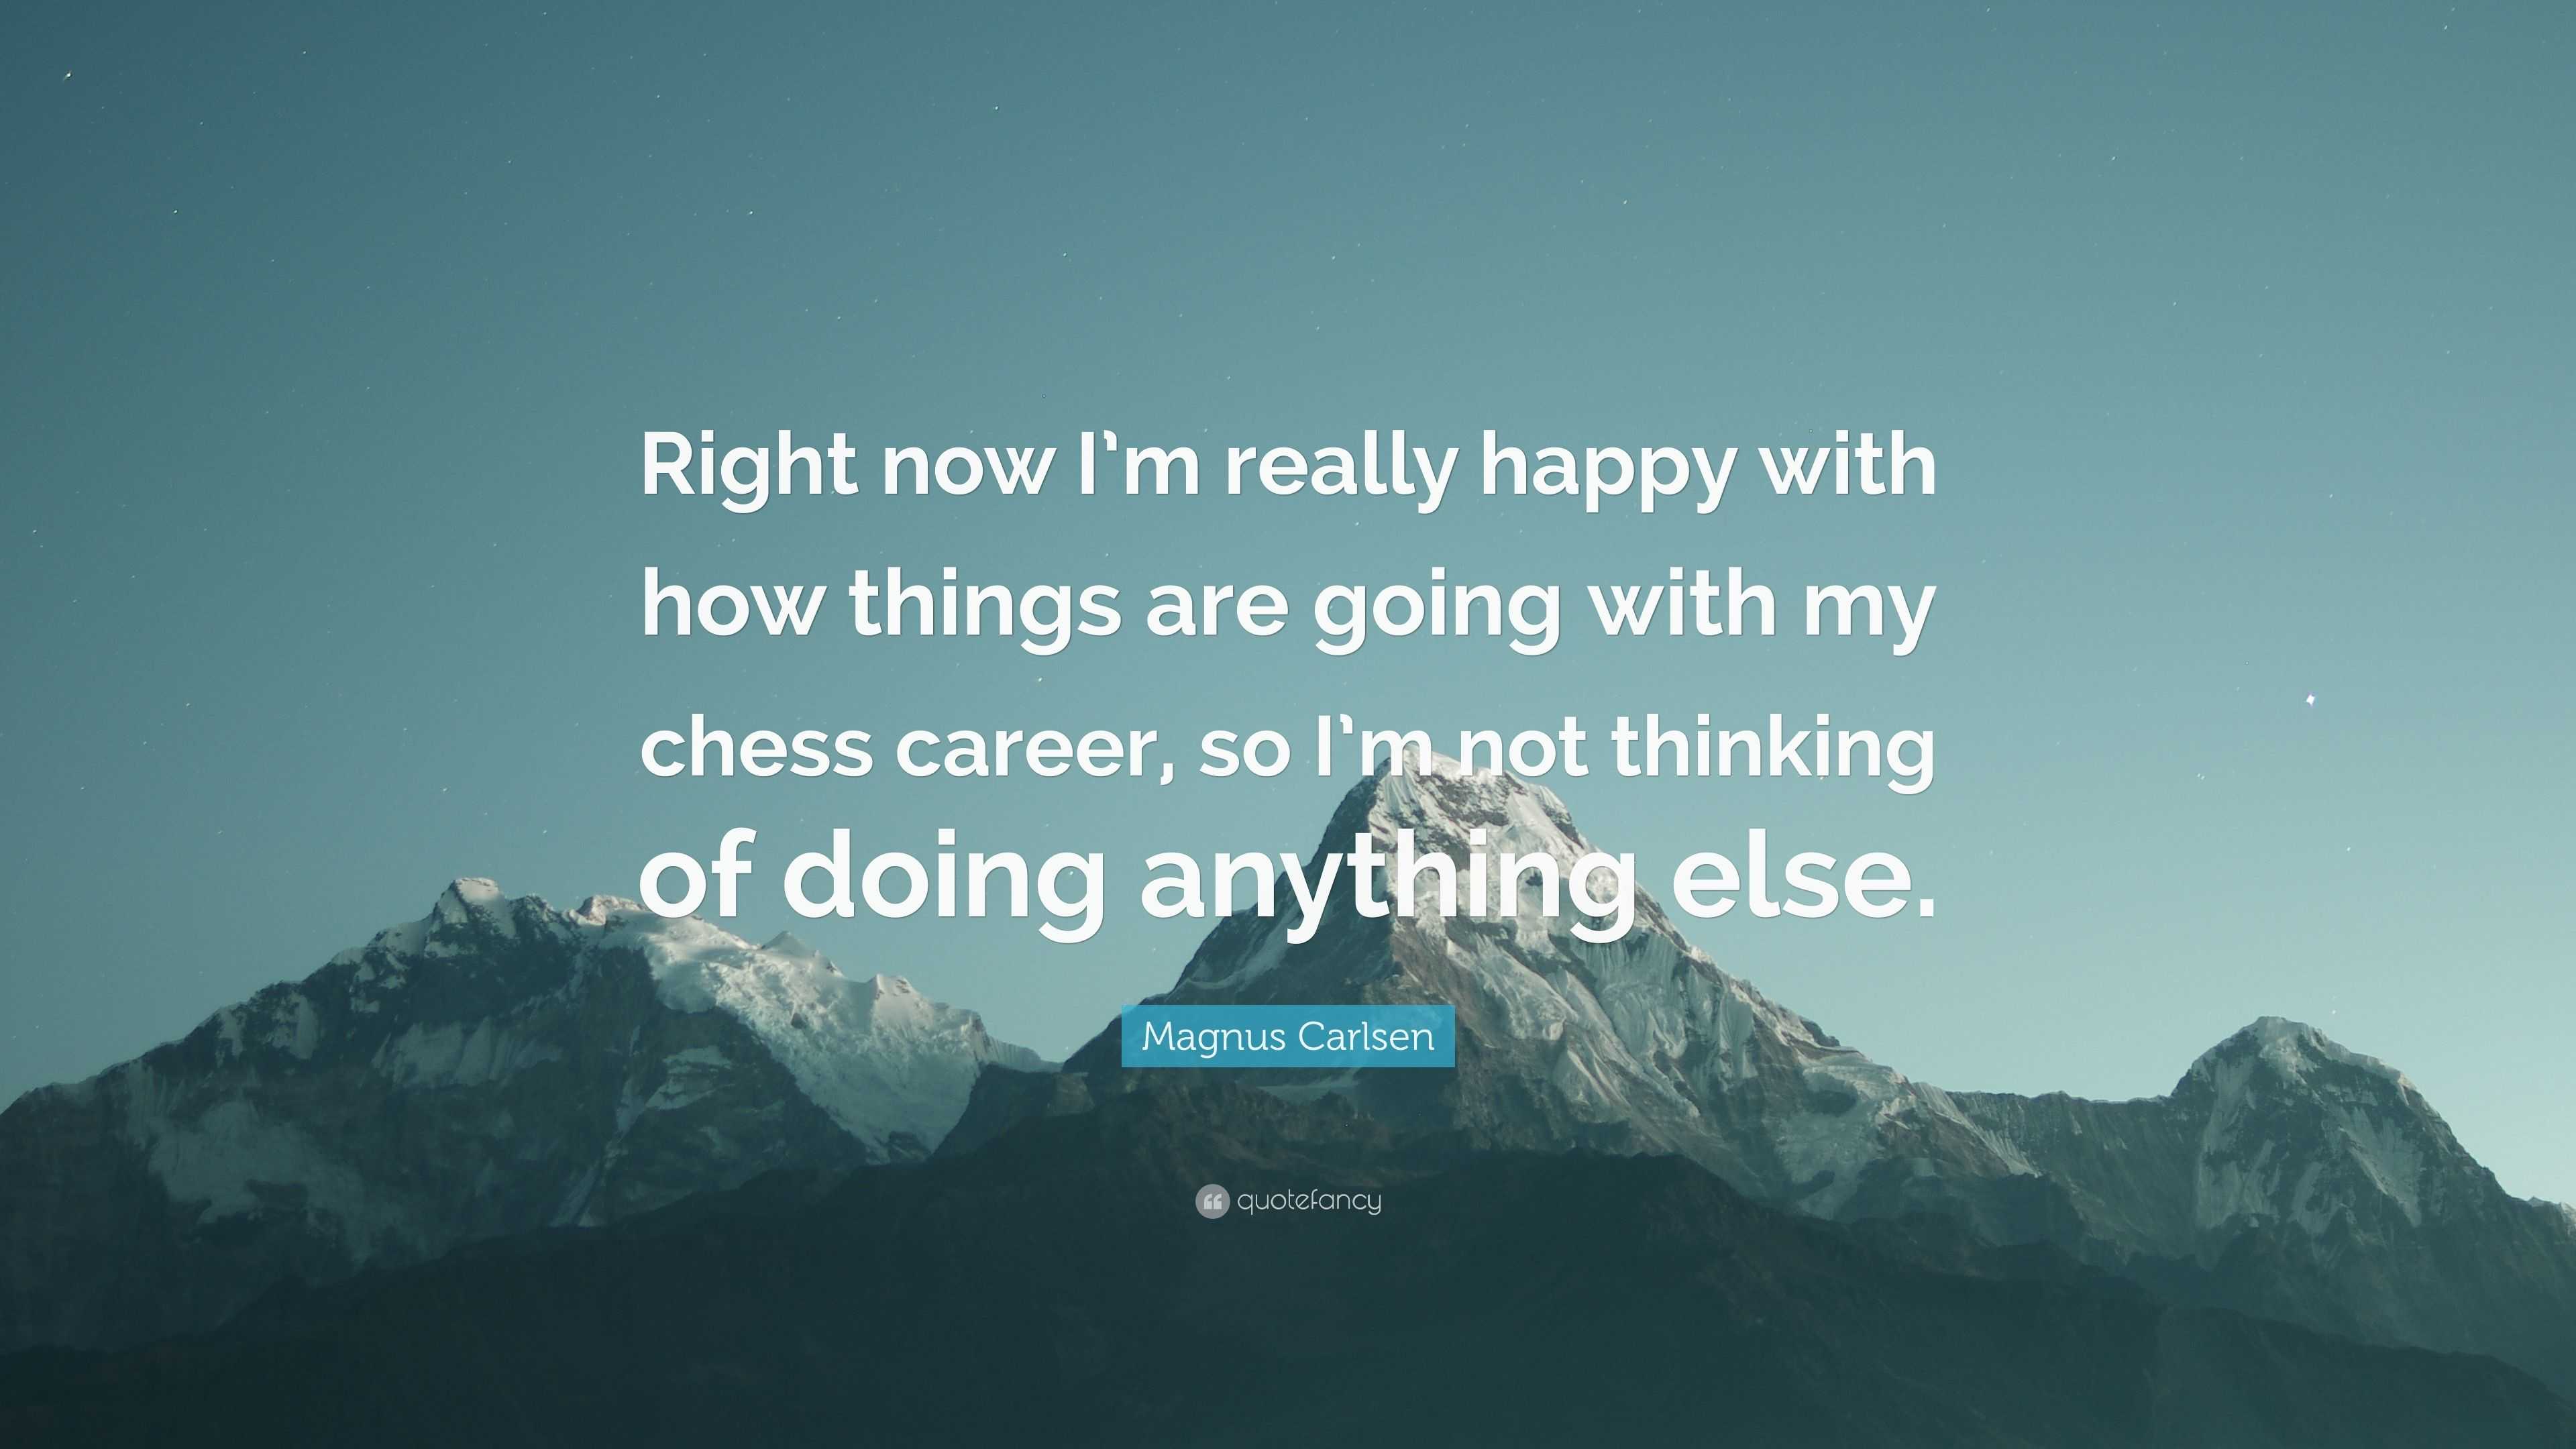 Magnus Carlsen Quote Right Now I M Really Happy With How Things Are Going With My